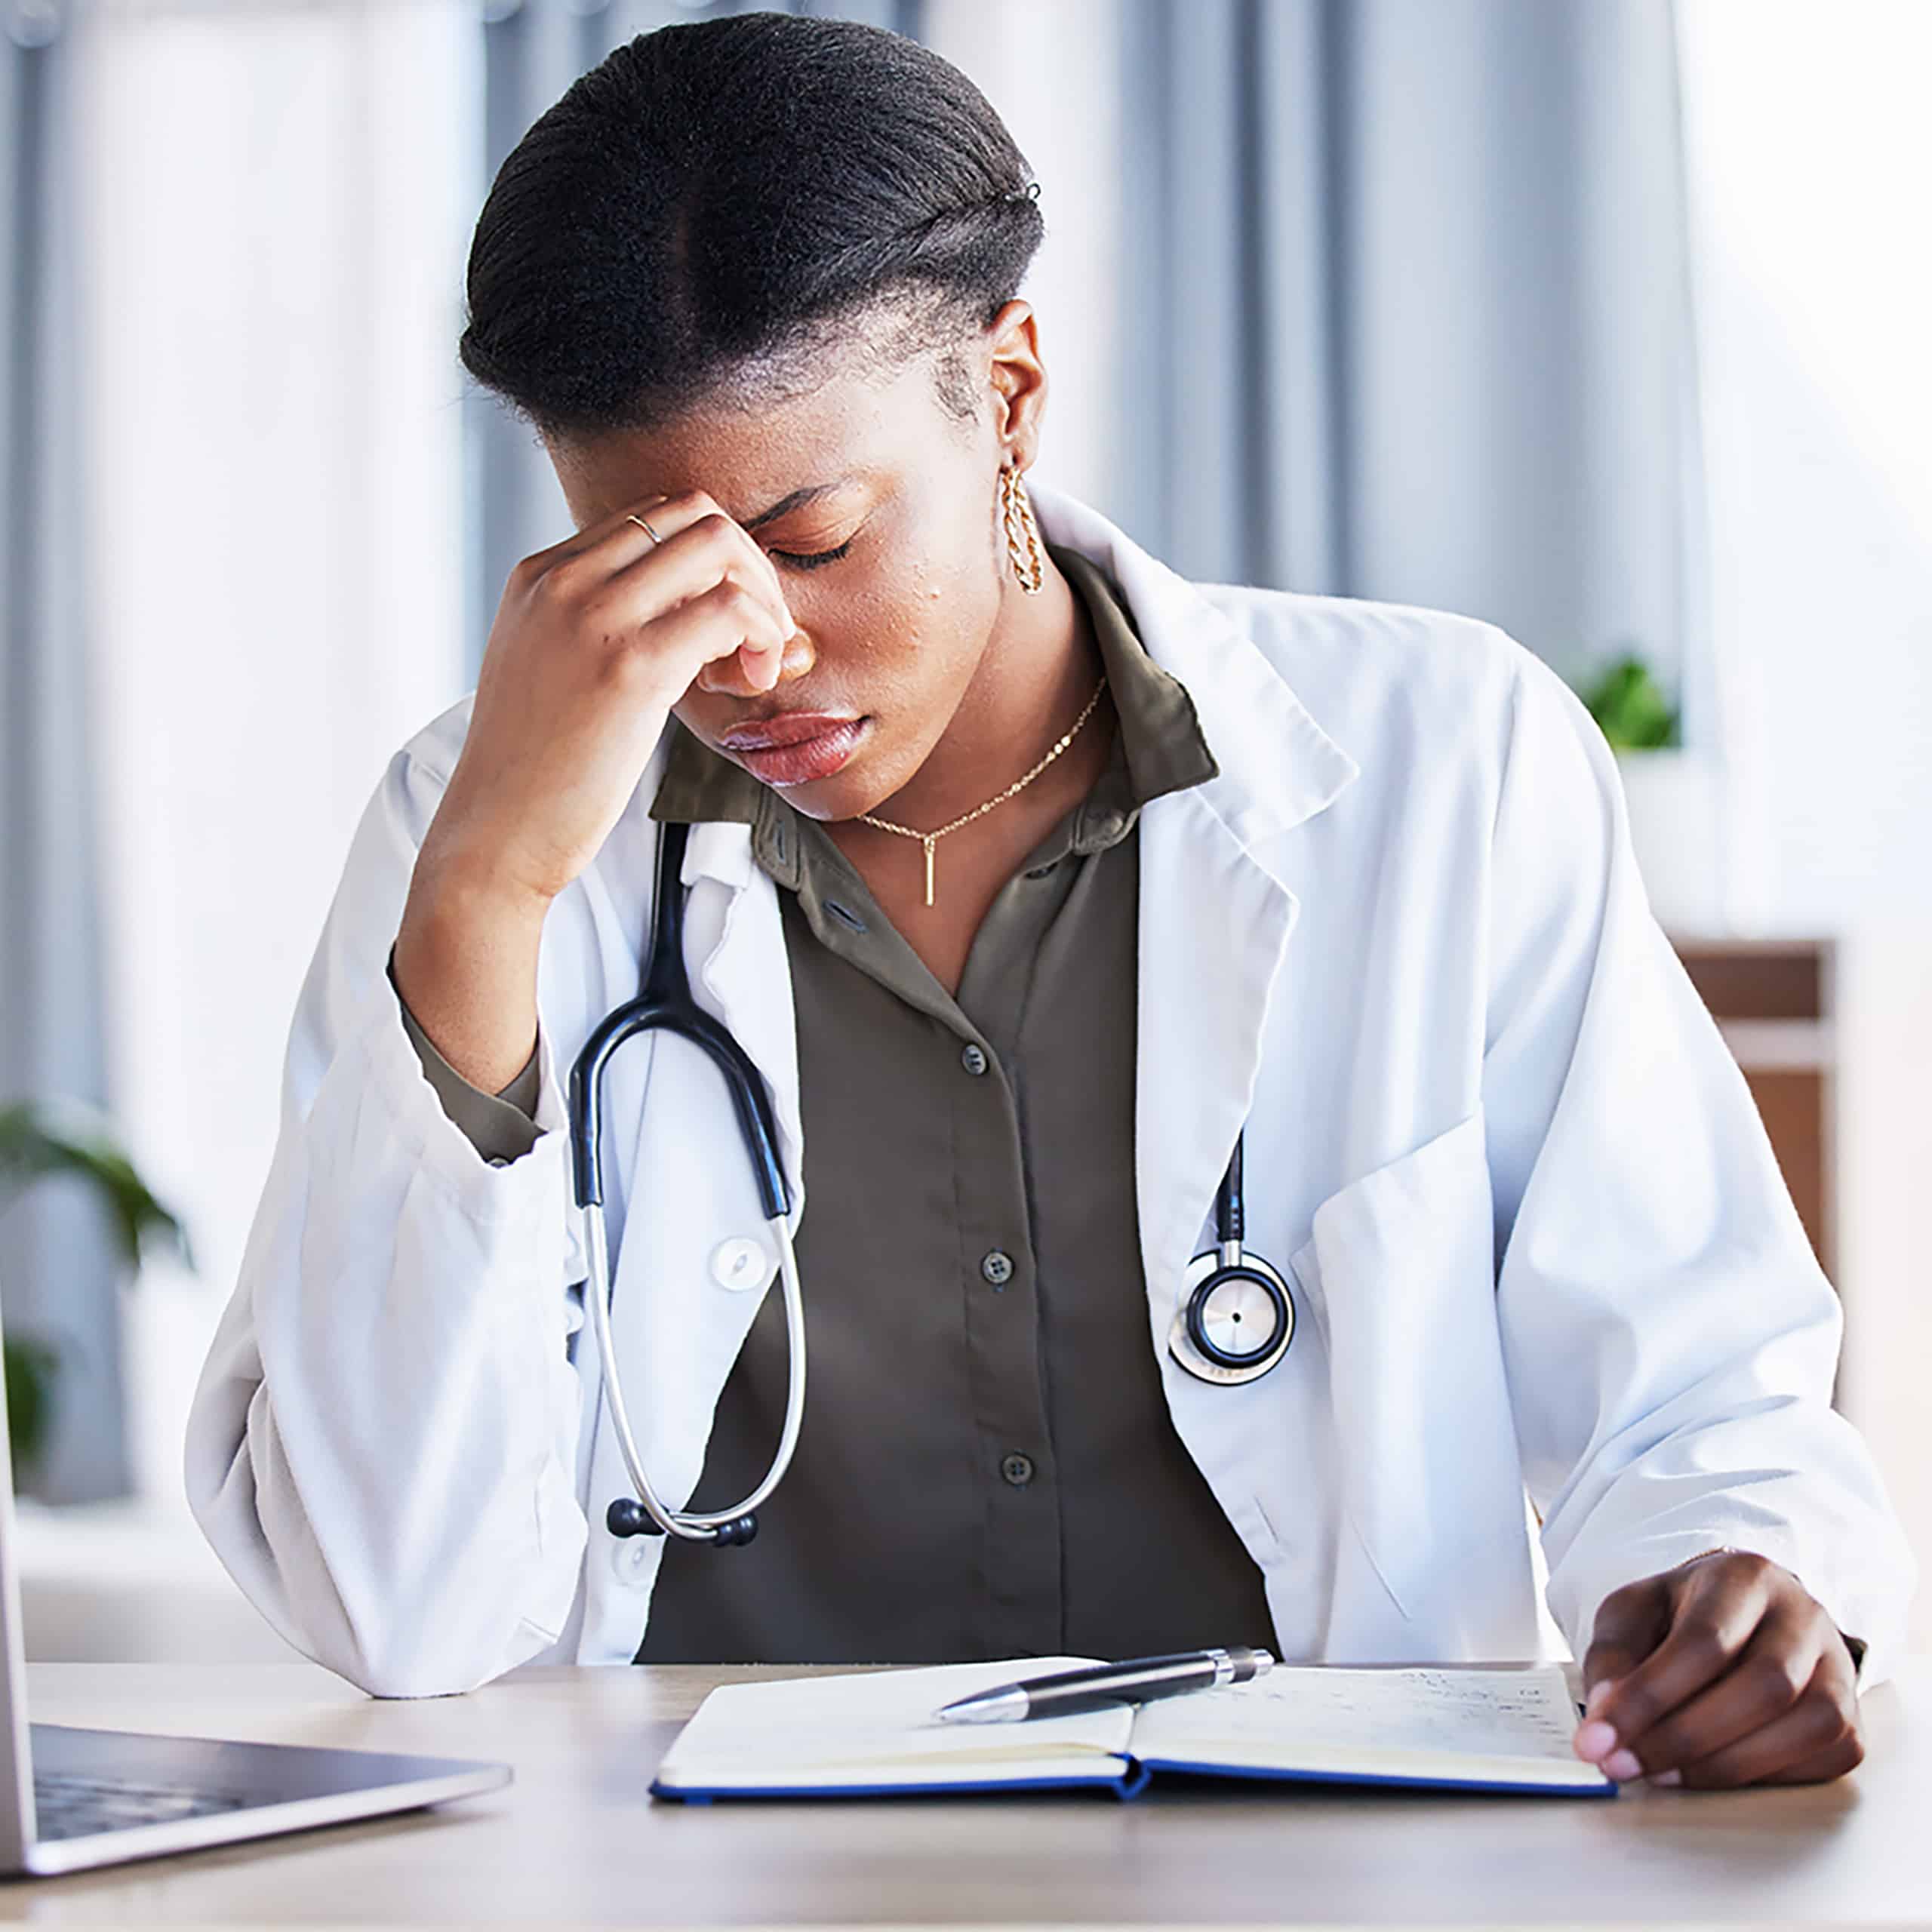 Headache, tired doctor and woman in medical office with burnout challenge, clinic problem and stress risk. Frustrated black female healthcare worker with fatigue, migraine pain and anxiety of mistake.